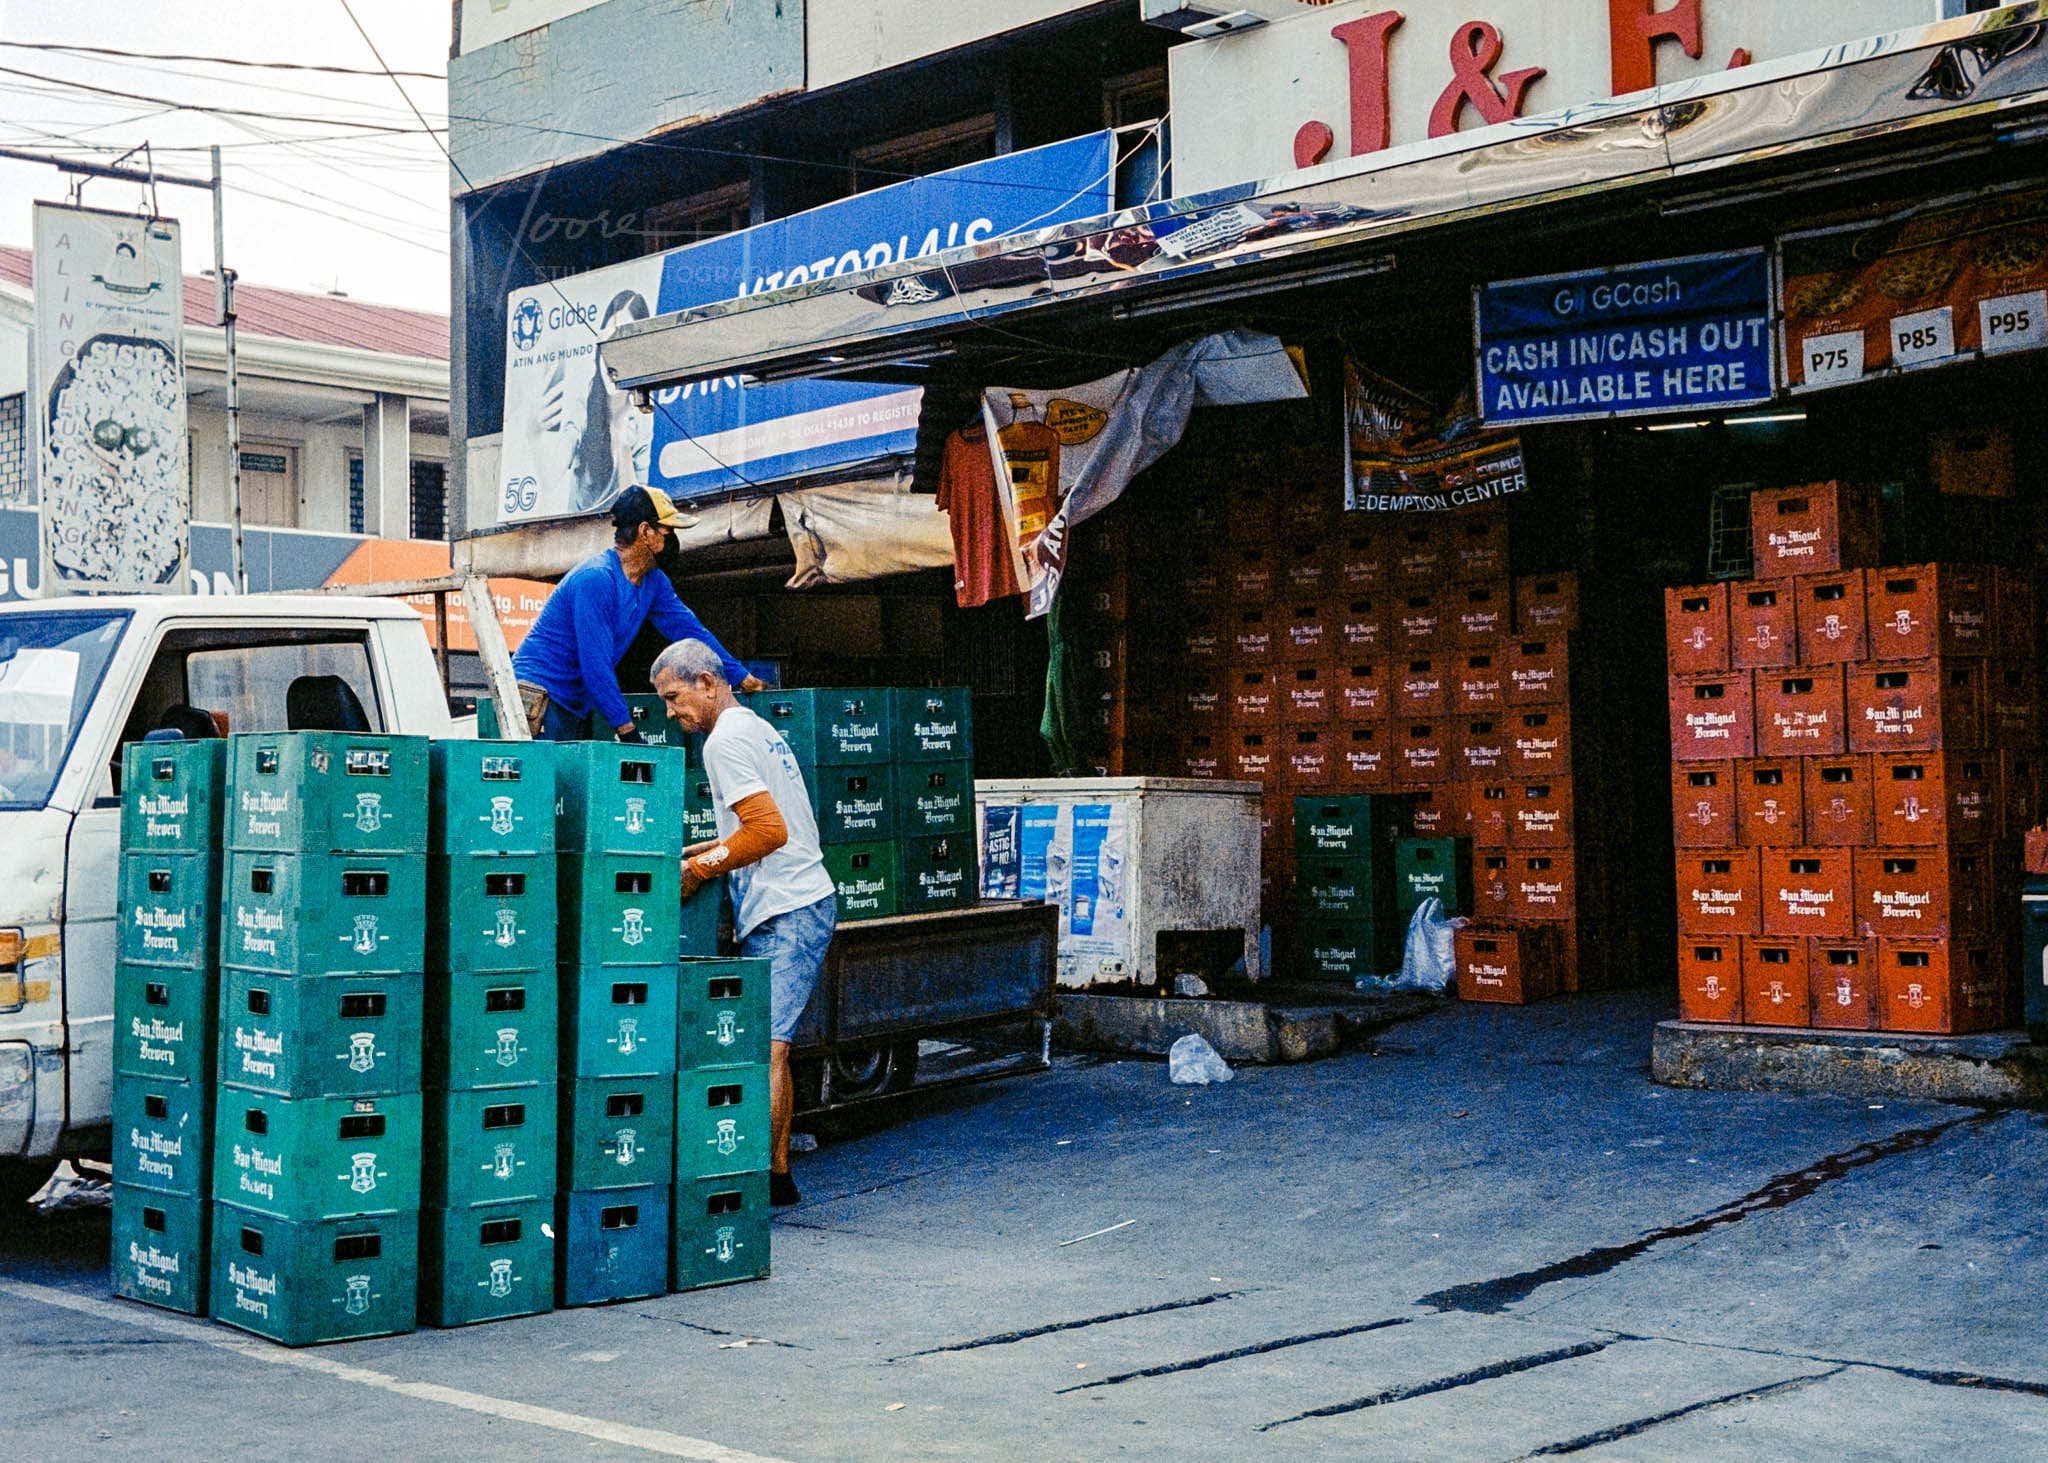 Workers handling green crates at a busy San Miguiel Beer distribution center.